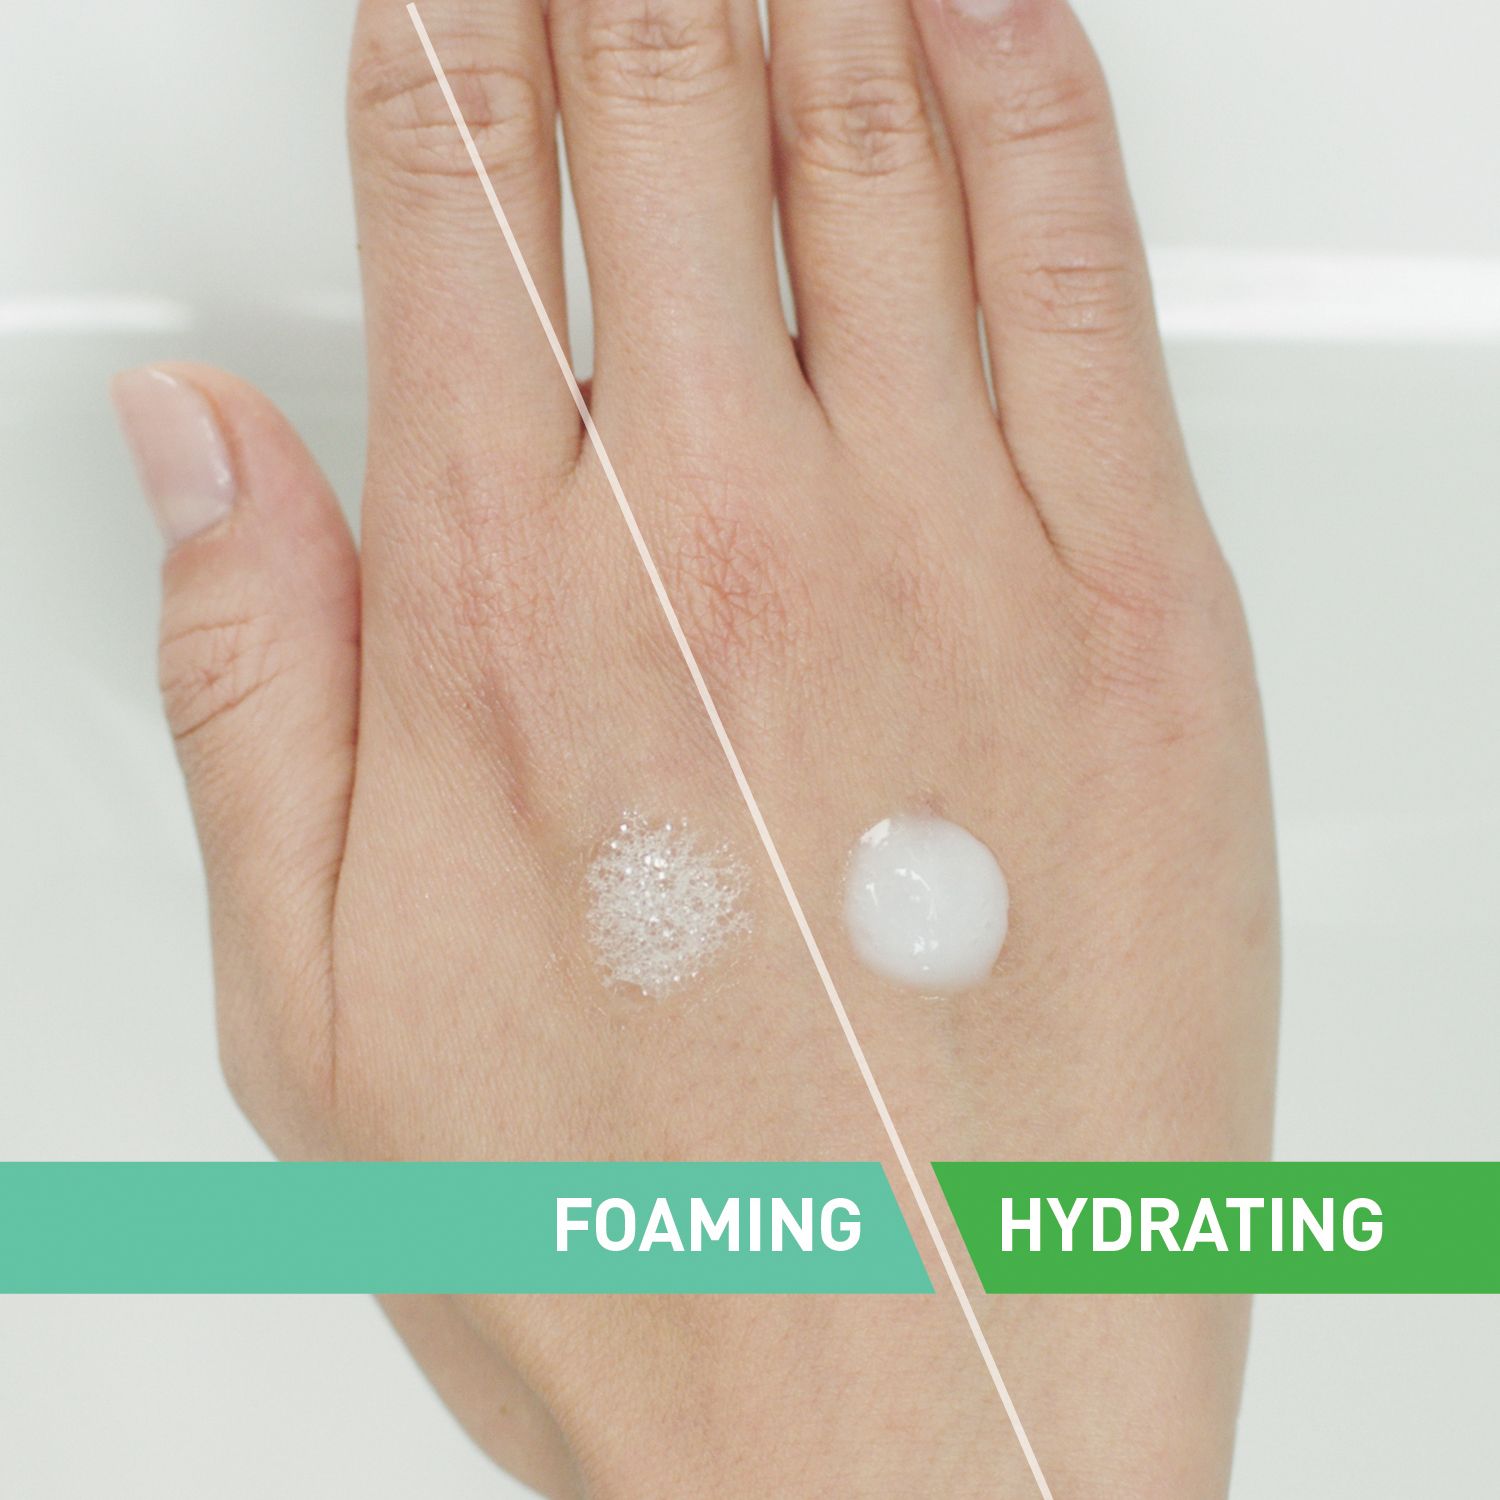 CERAVE Foaming Cleanser for Normal to Oily Skin with Hyaluronic Acid 473 ml